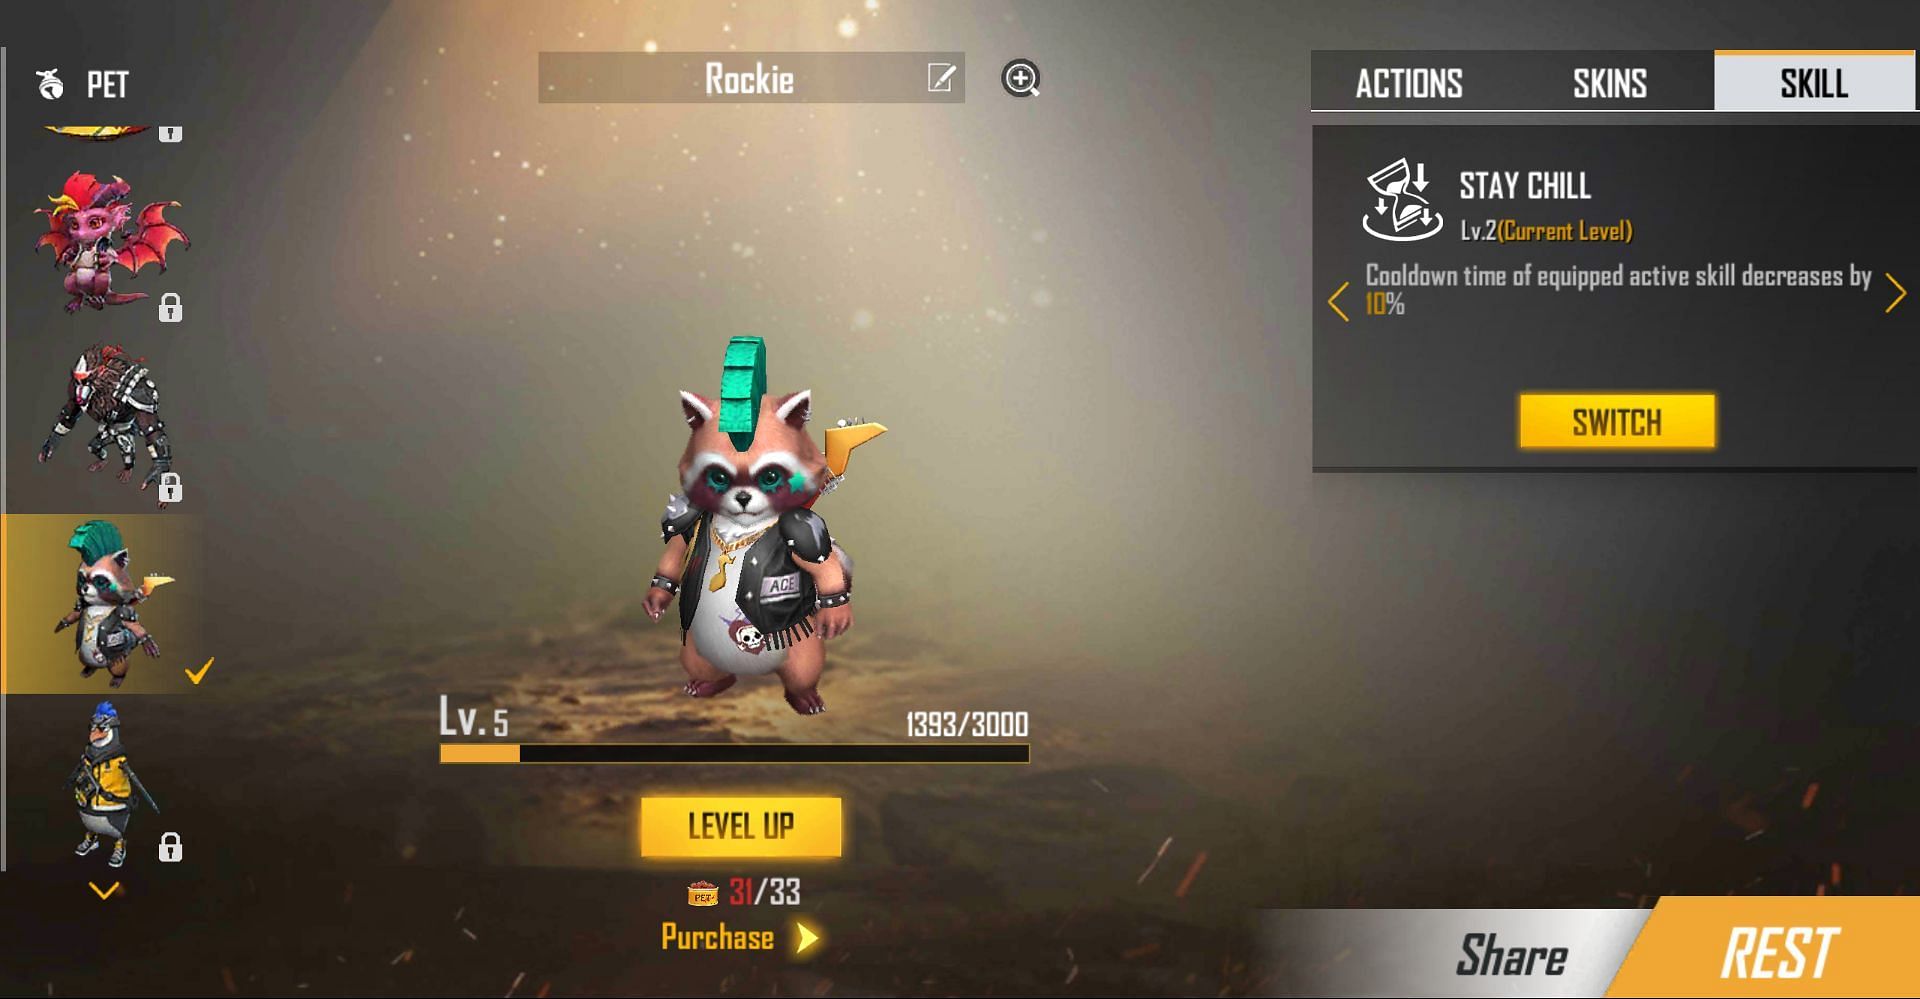 Rockie helps use active abilities more often (Image via Free Fire)